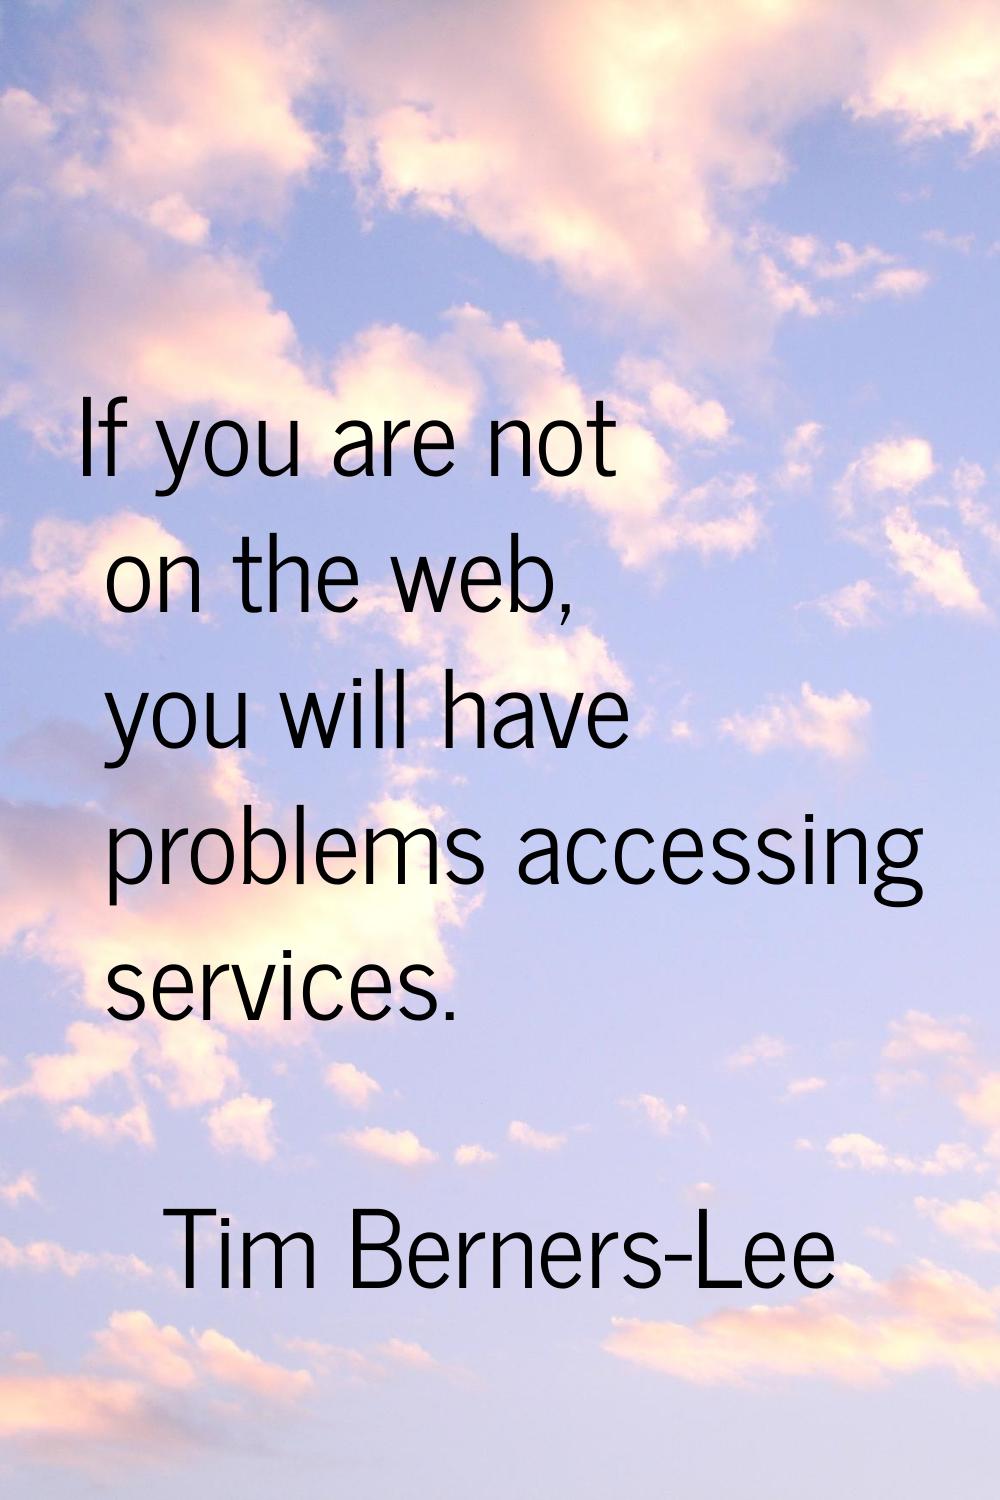 If you are not on the web, you will have problems accessing services.